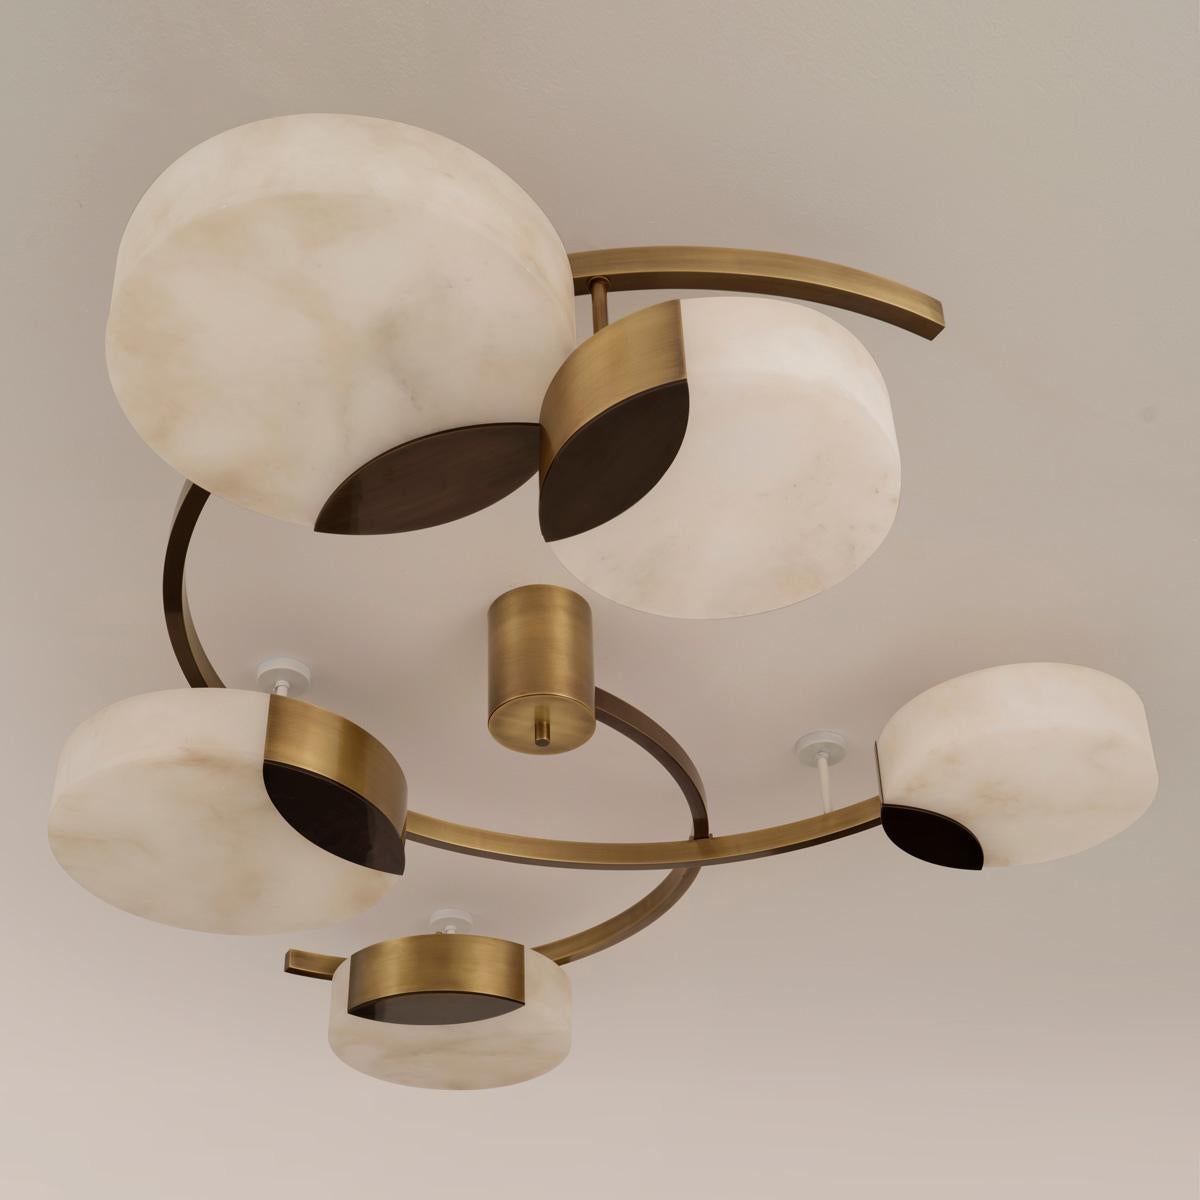 Cloud N.5 Ceiling Light by Gaspare Asaro-Satin Brass Finish For Sale 2